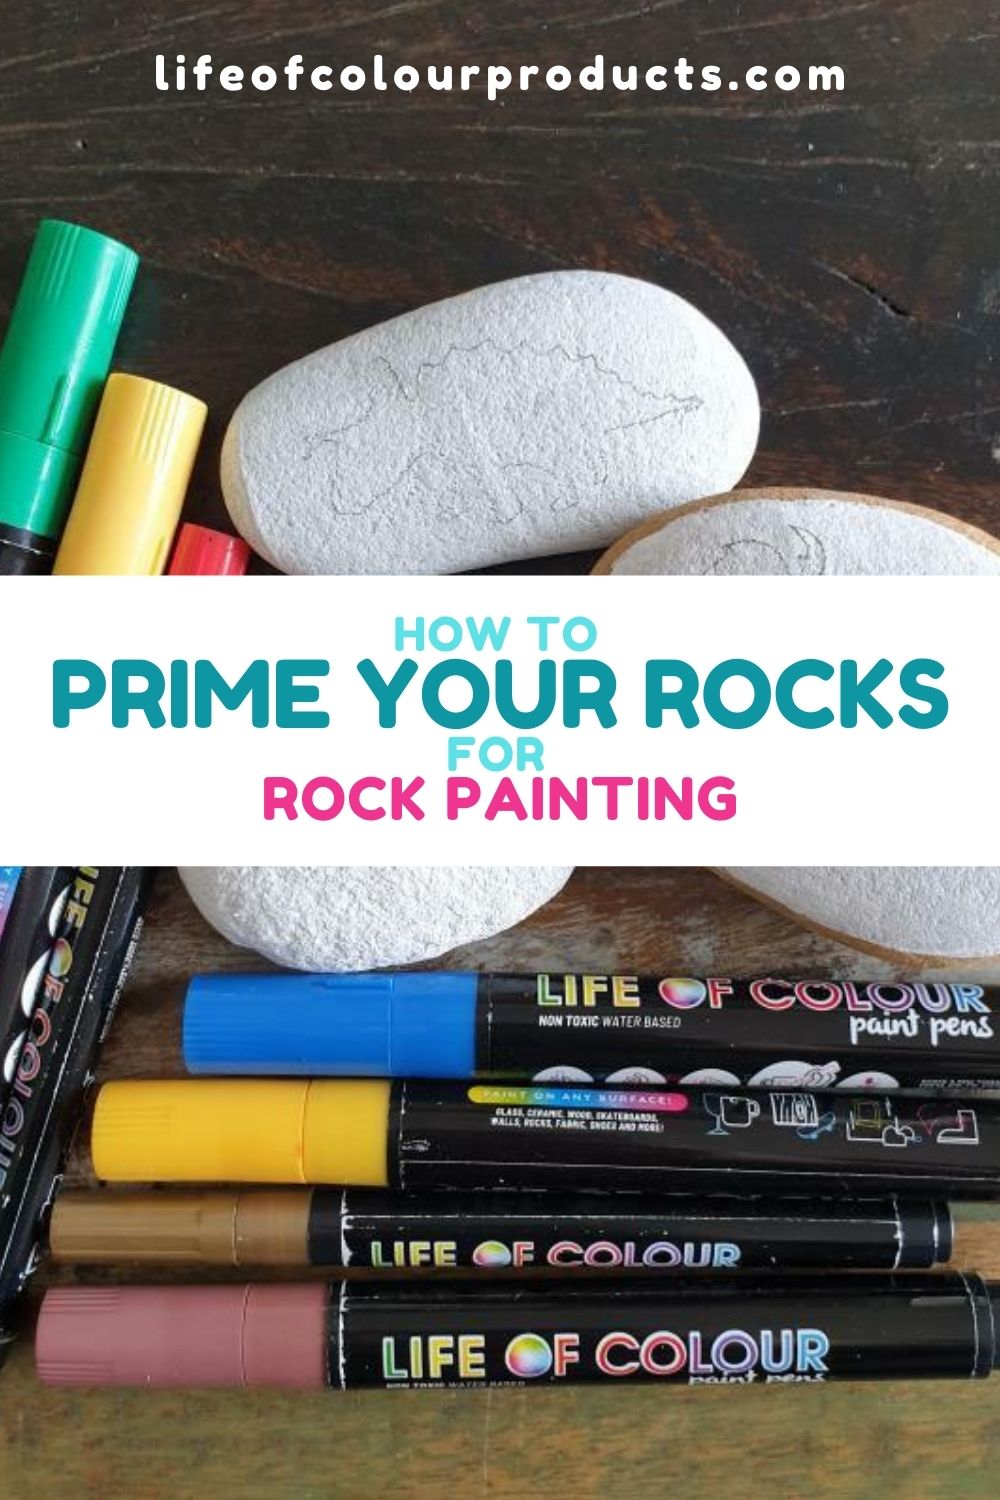 How to prime your rocks for rock painting